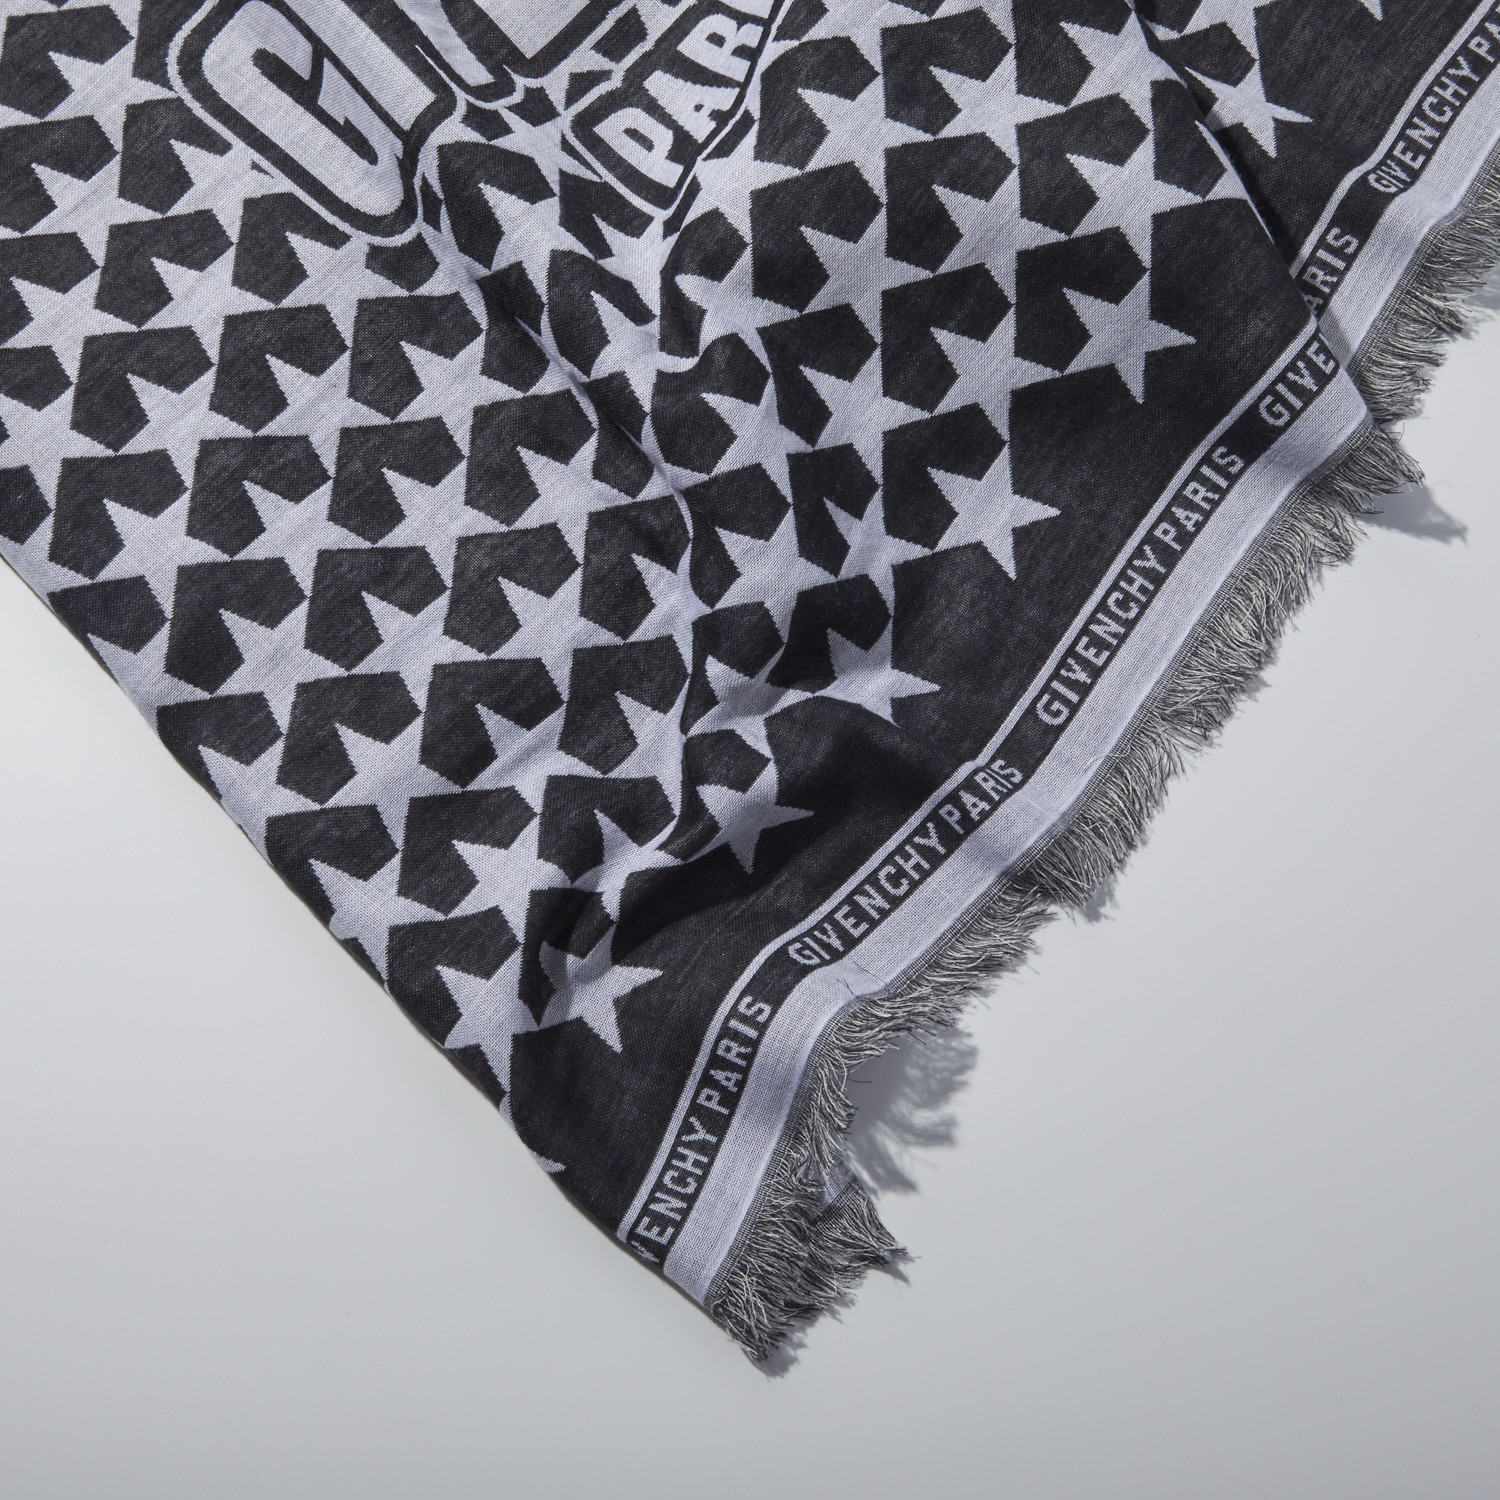 Givenchy // Wool Star Scarf // Black - Designer Scarves - Touch of Modern